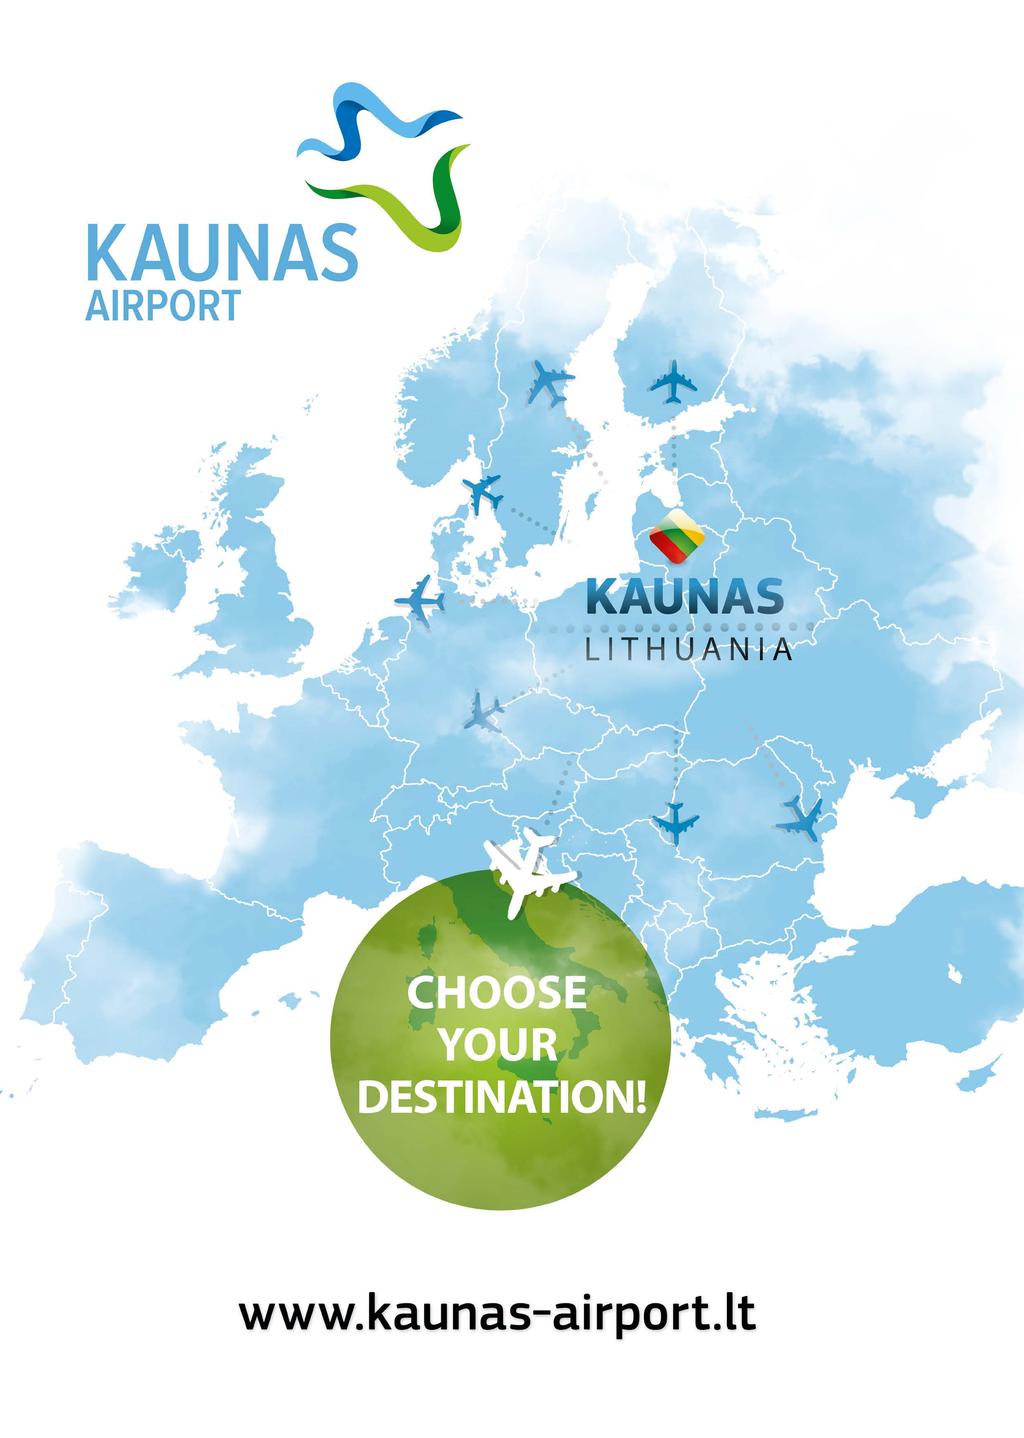 3 Host Your Conference in Kaunas Welcome to Kaunas, the second largest Lithuania s city, which keeps the authentic spirit of the country s national character alive.